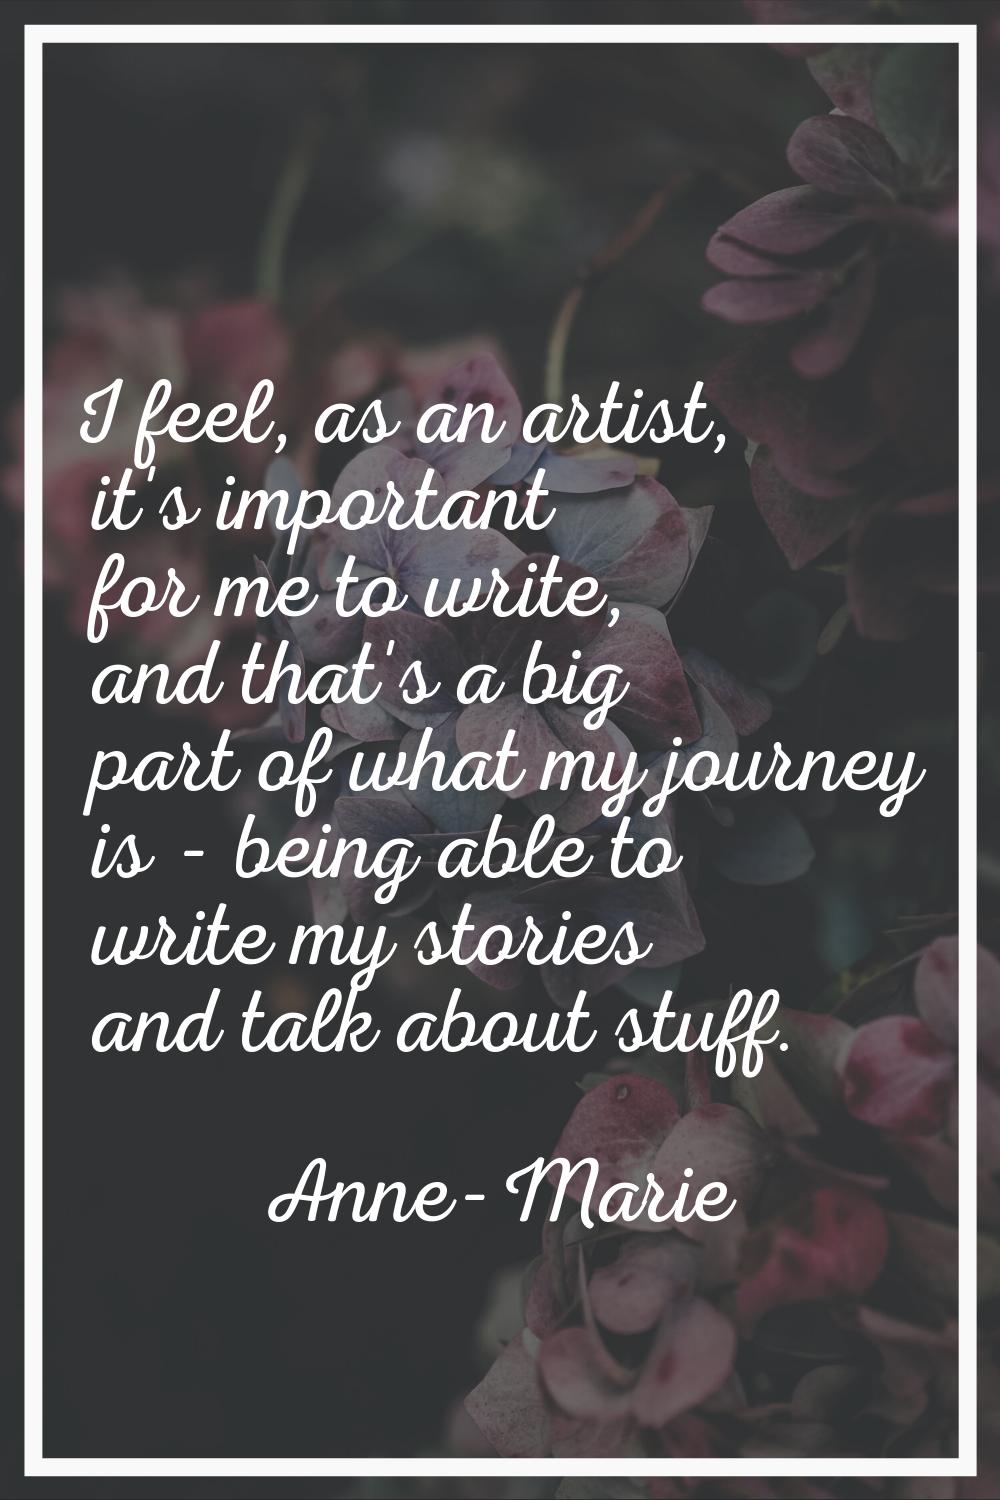 I feel, as an artist, it's important for me to write, and that's a big part of what my journey is -